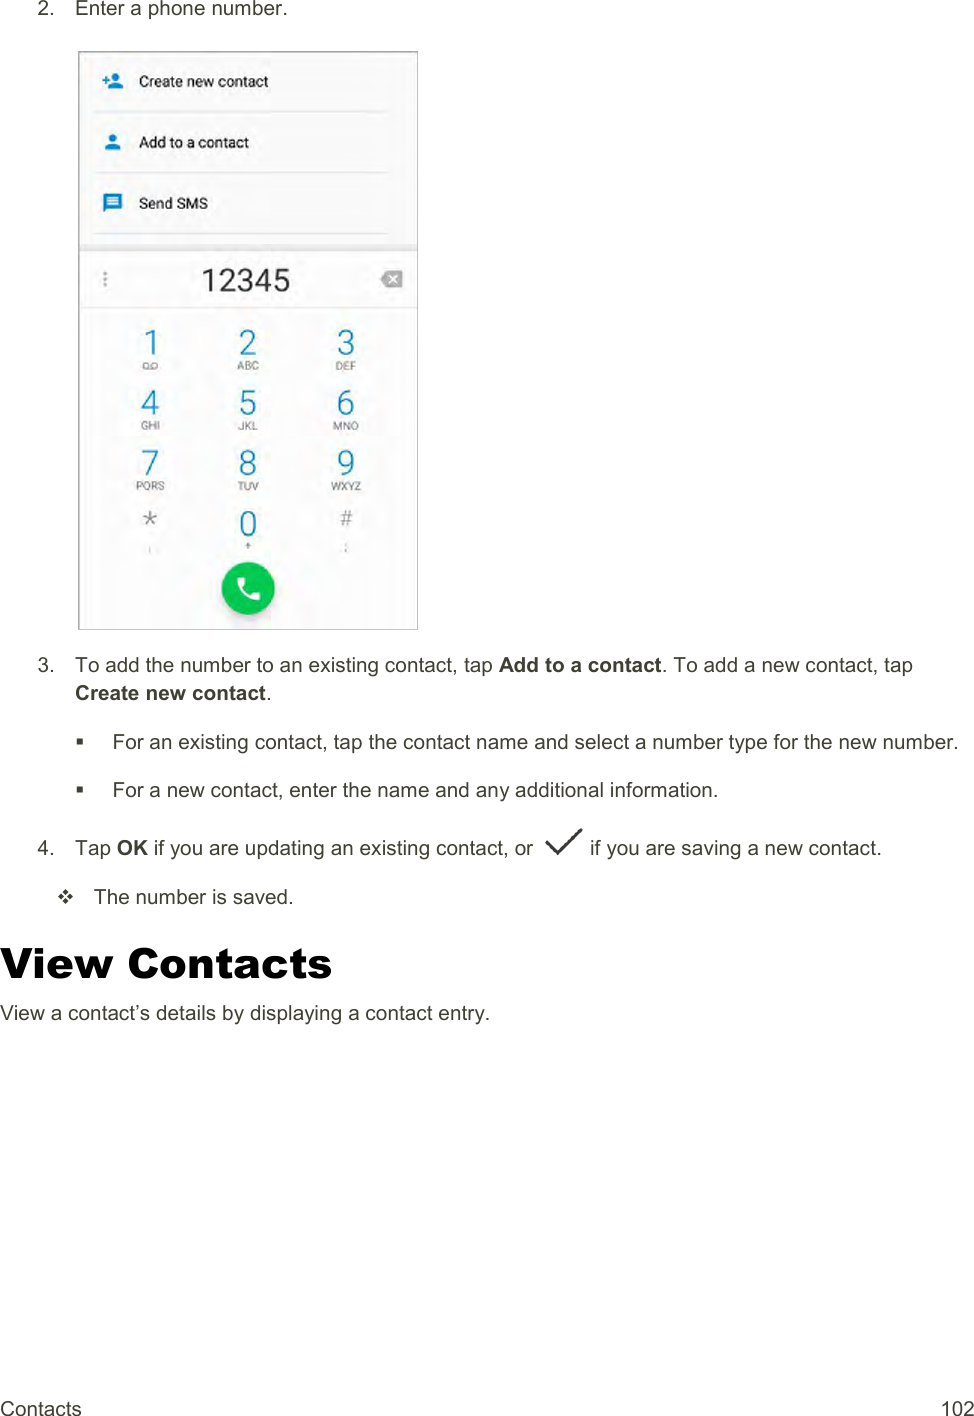 Contacts  102 2.  Enter a phone number.   3.  To add the number to an existing contact, tap Add to a contact. To add a new contact, tap Create new contact.   For an existing contact, tap the contact name and select a number type for the new number.   For a new contact, enter the name and any additional information. 4.  Tap OK if you are updating an existing contact, or   if you are saving a new contact.   The number is saved.  View Contacts View a contact’s details by displaying a contact entry. 